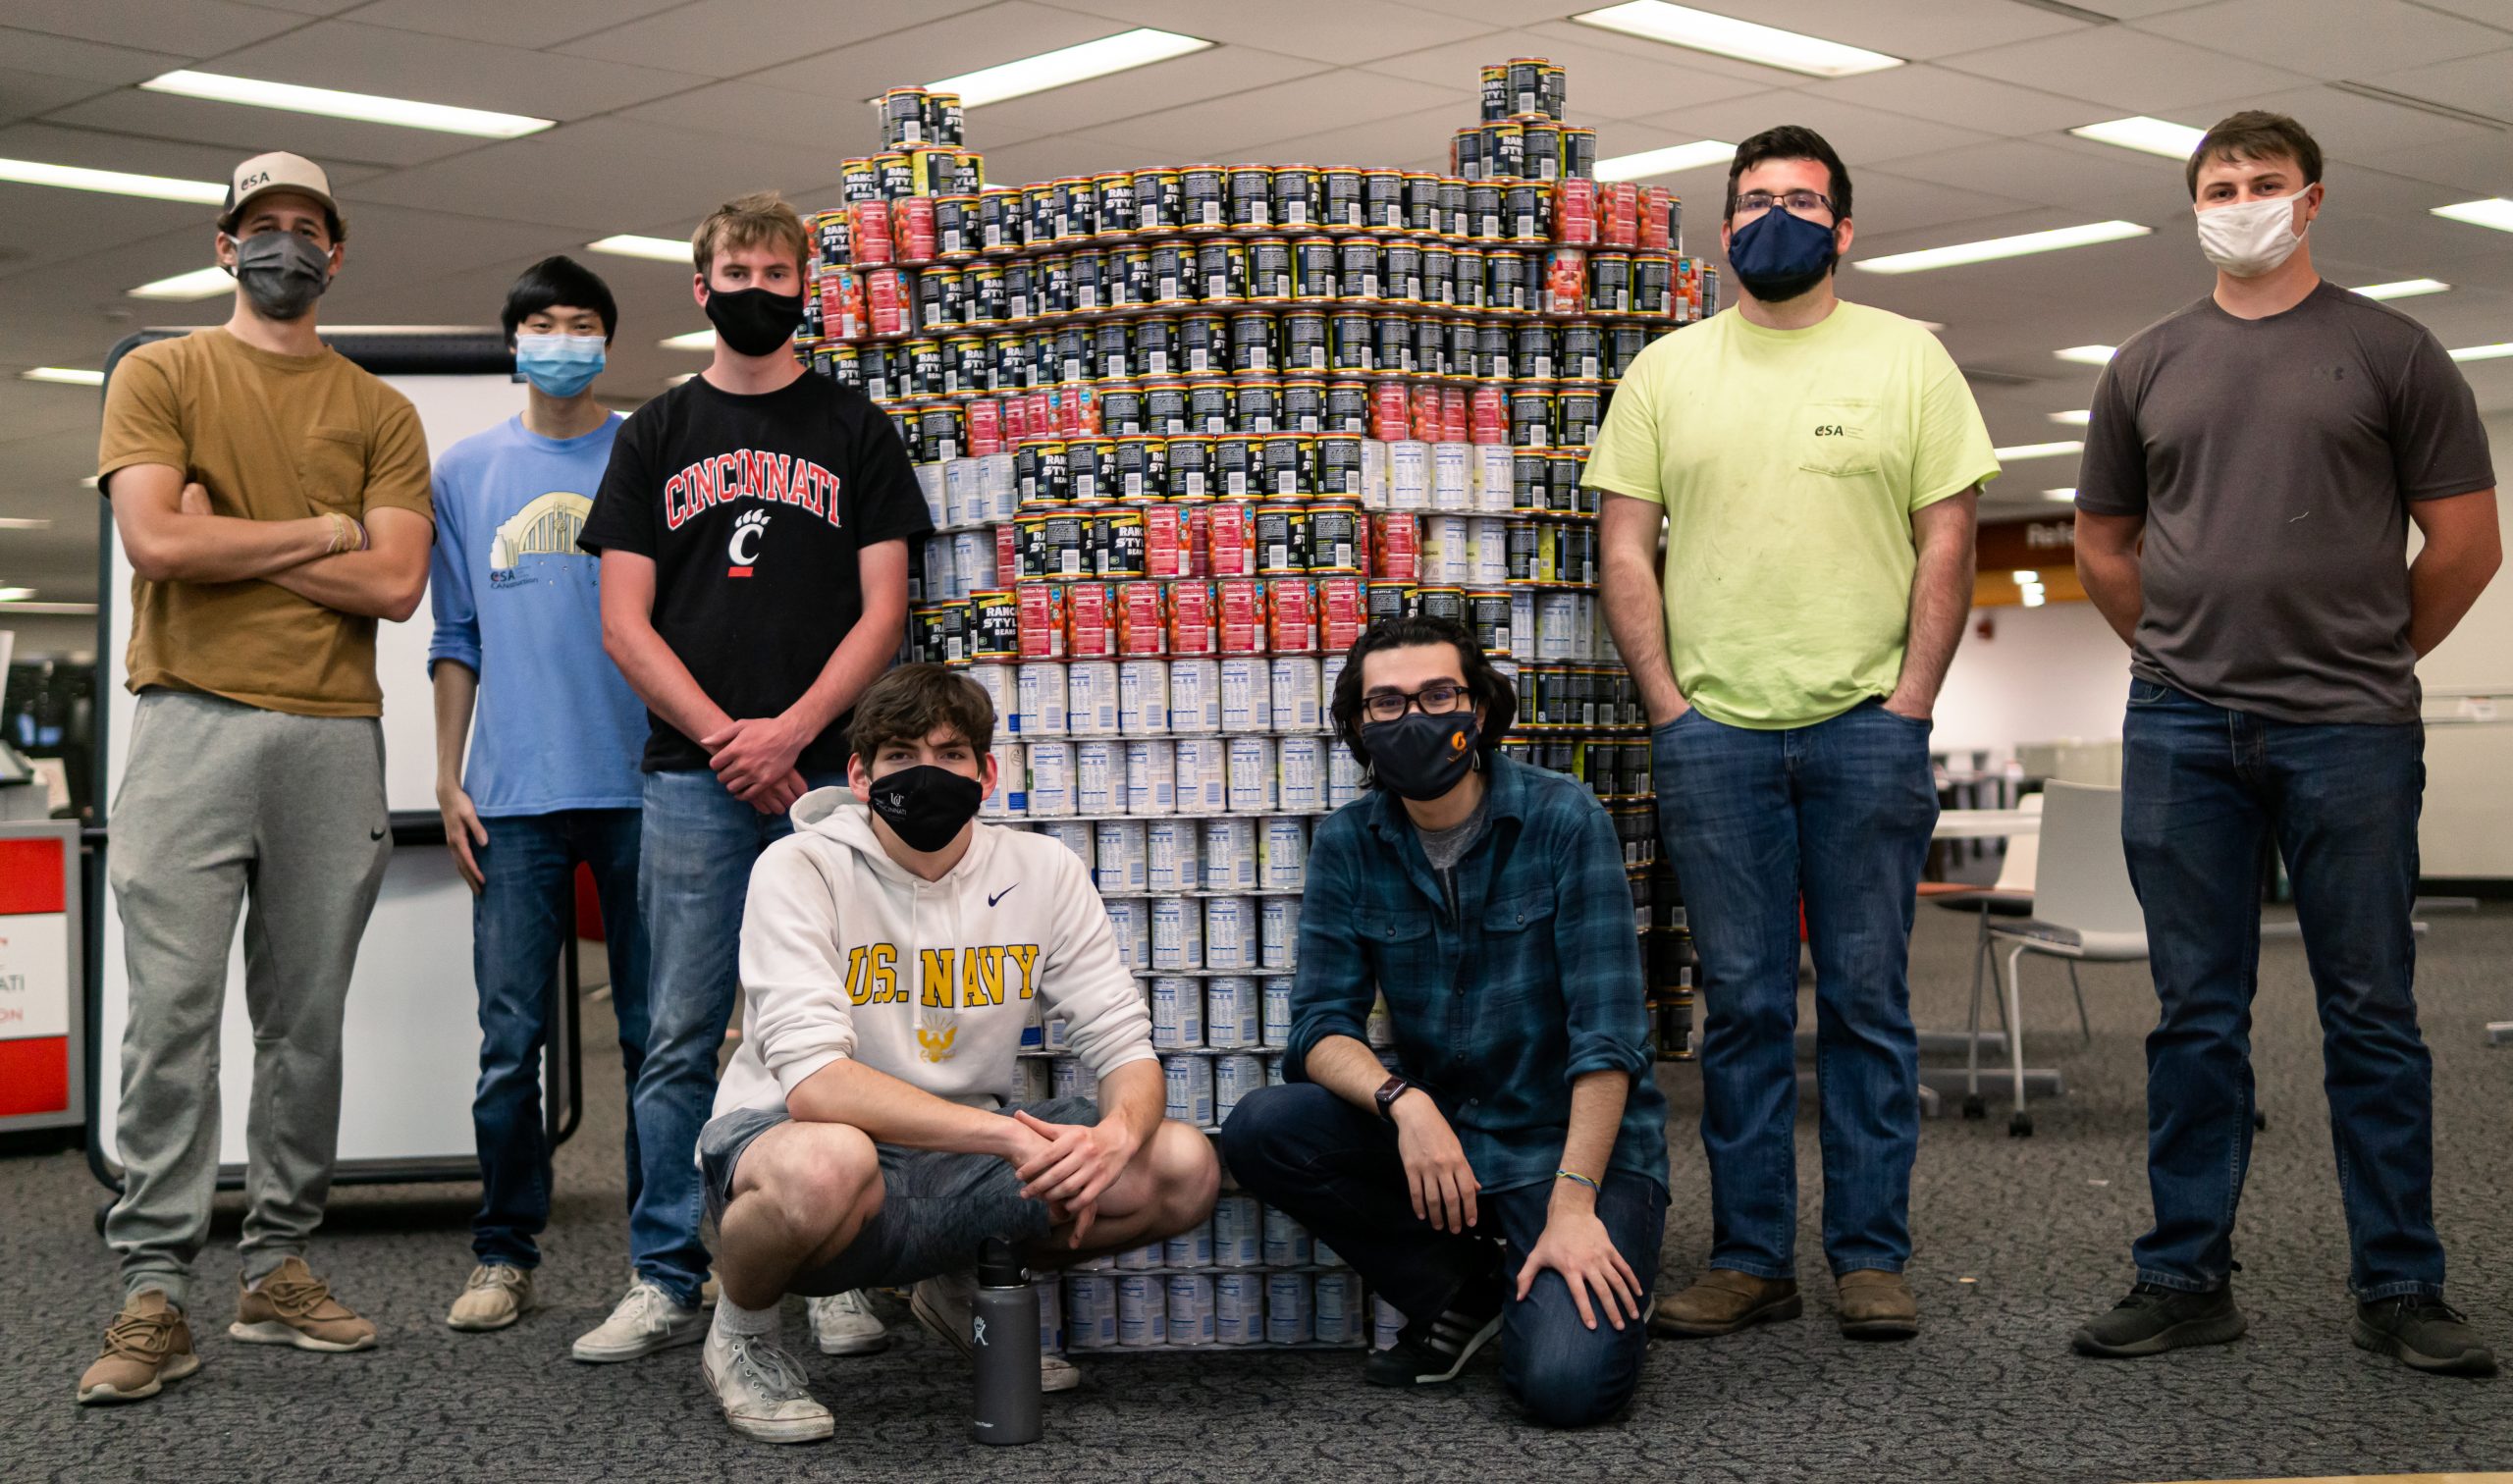 Students from the Construction Student Association pose in front of their canned sculpture